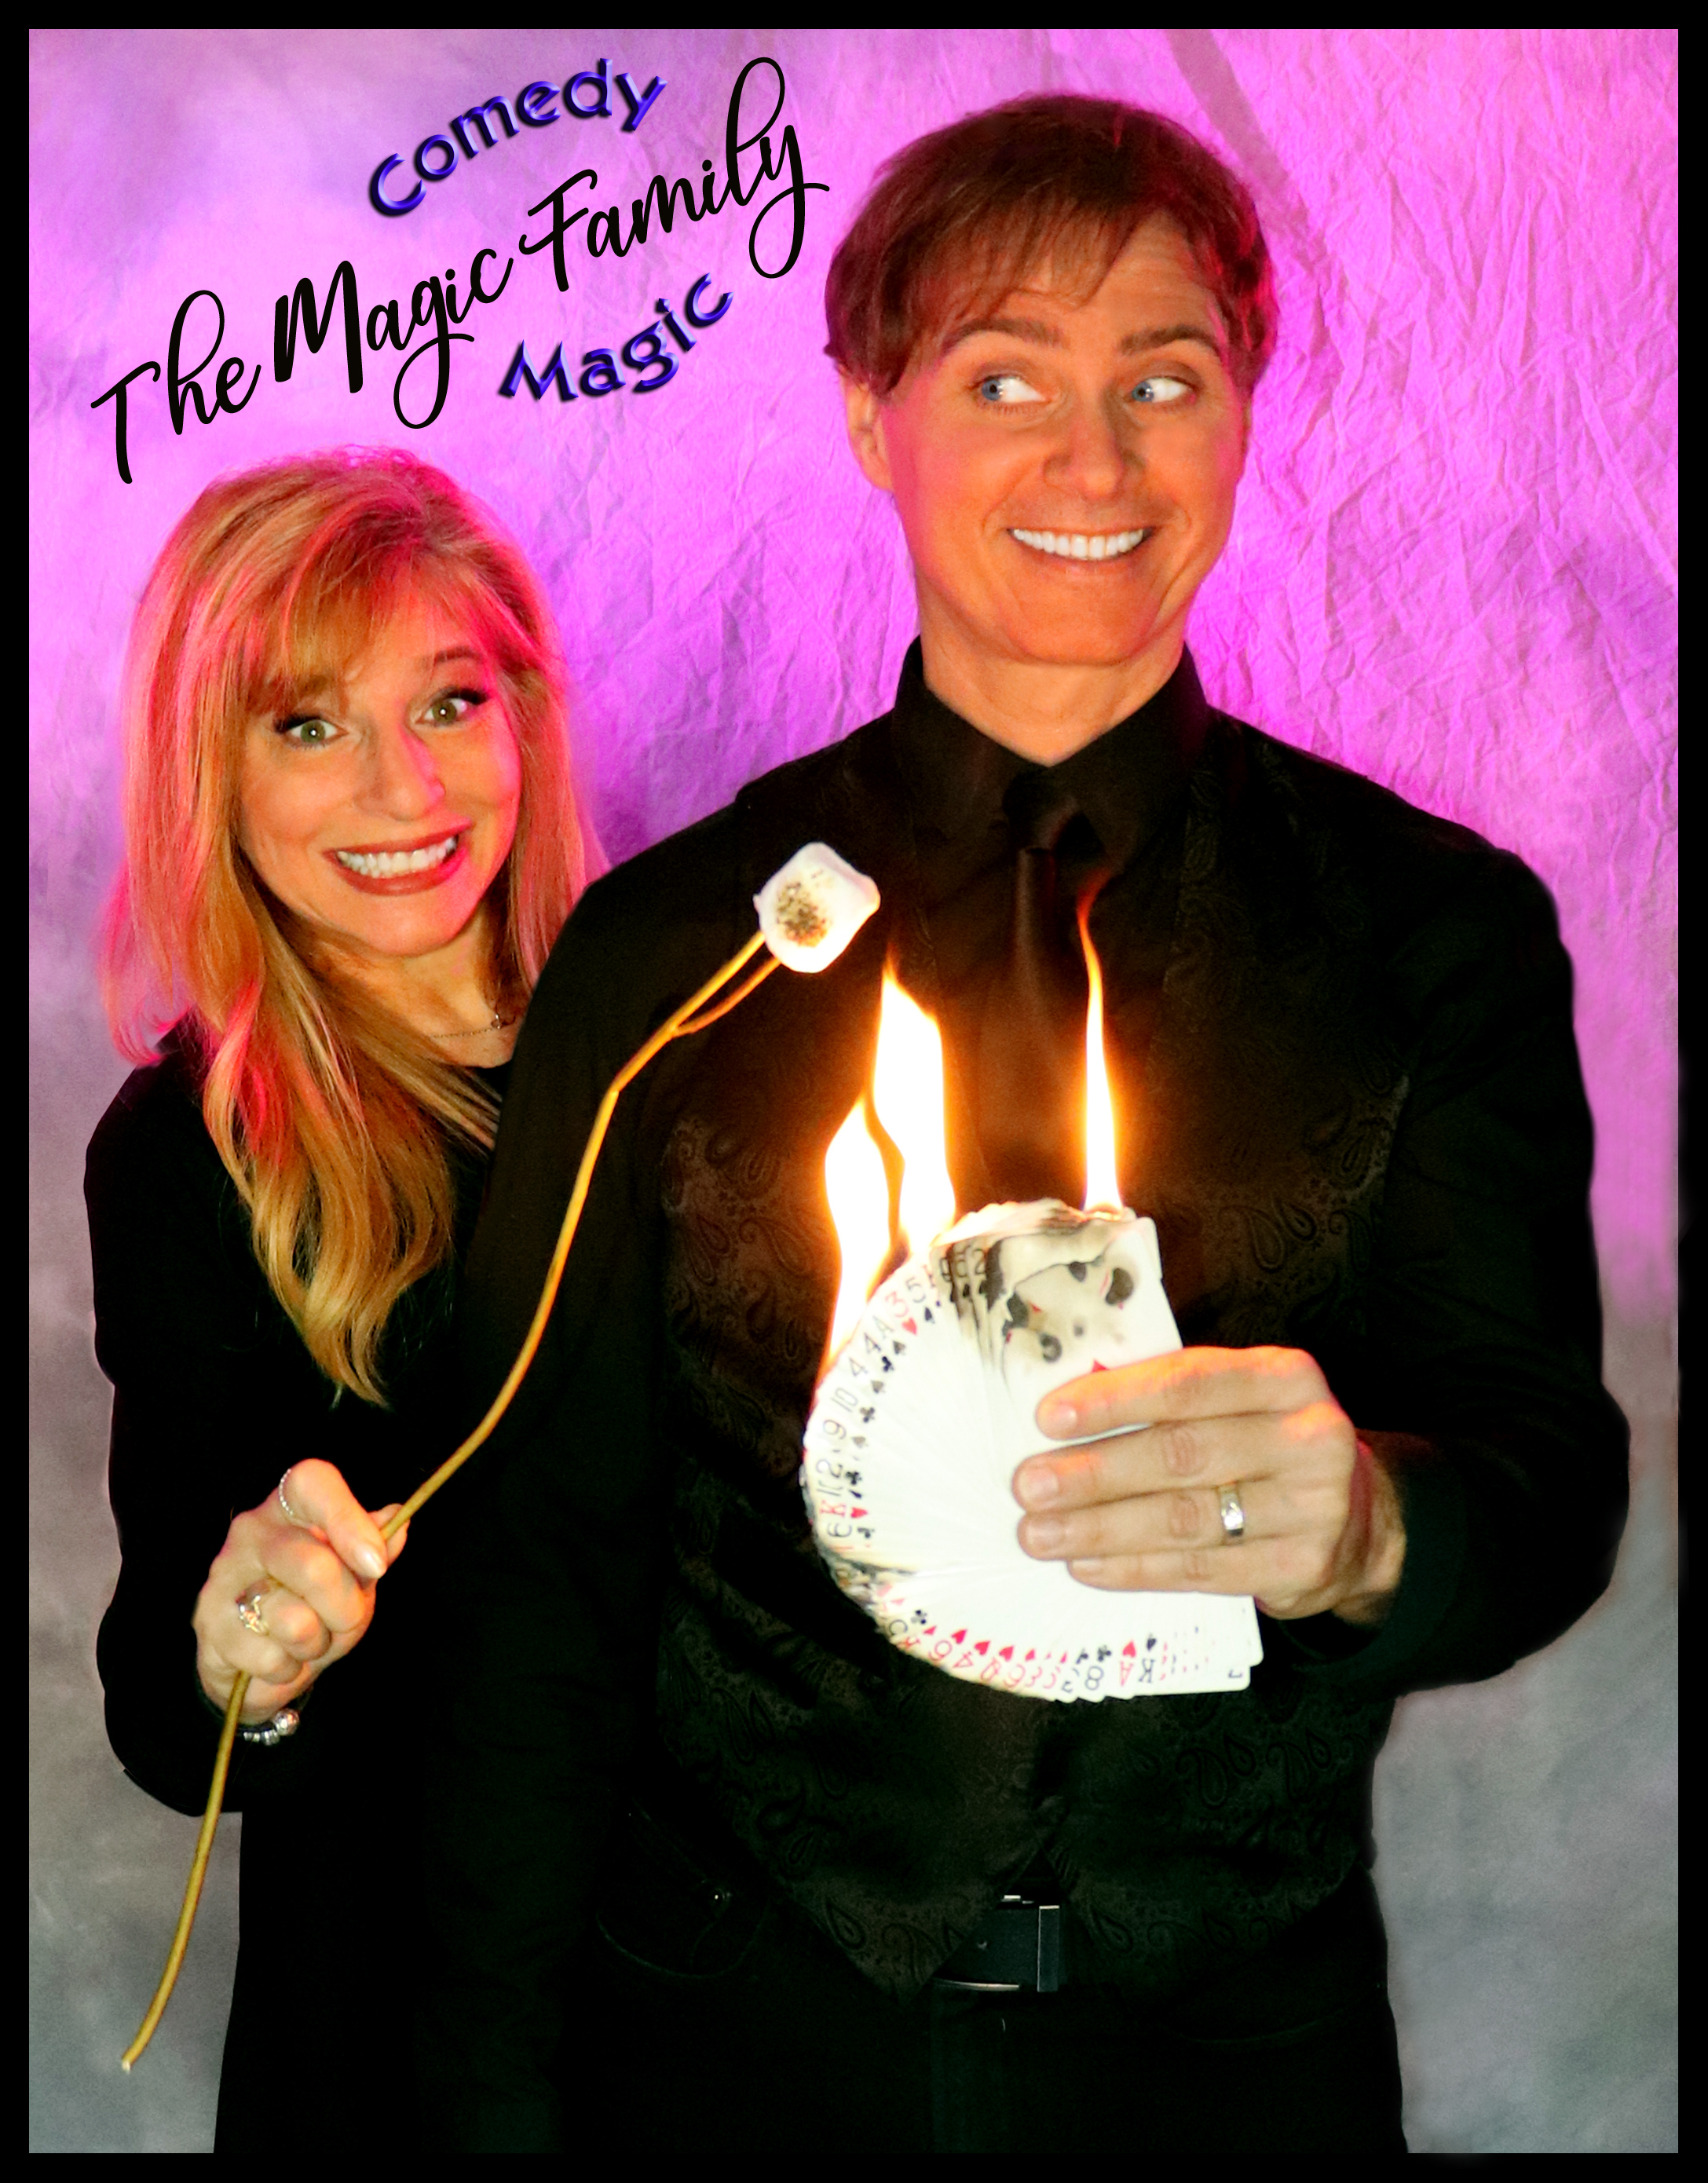 The Magic Family - Toronto's First Family of Magic & Comedy Entertainment